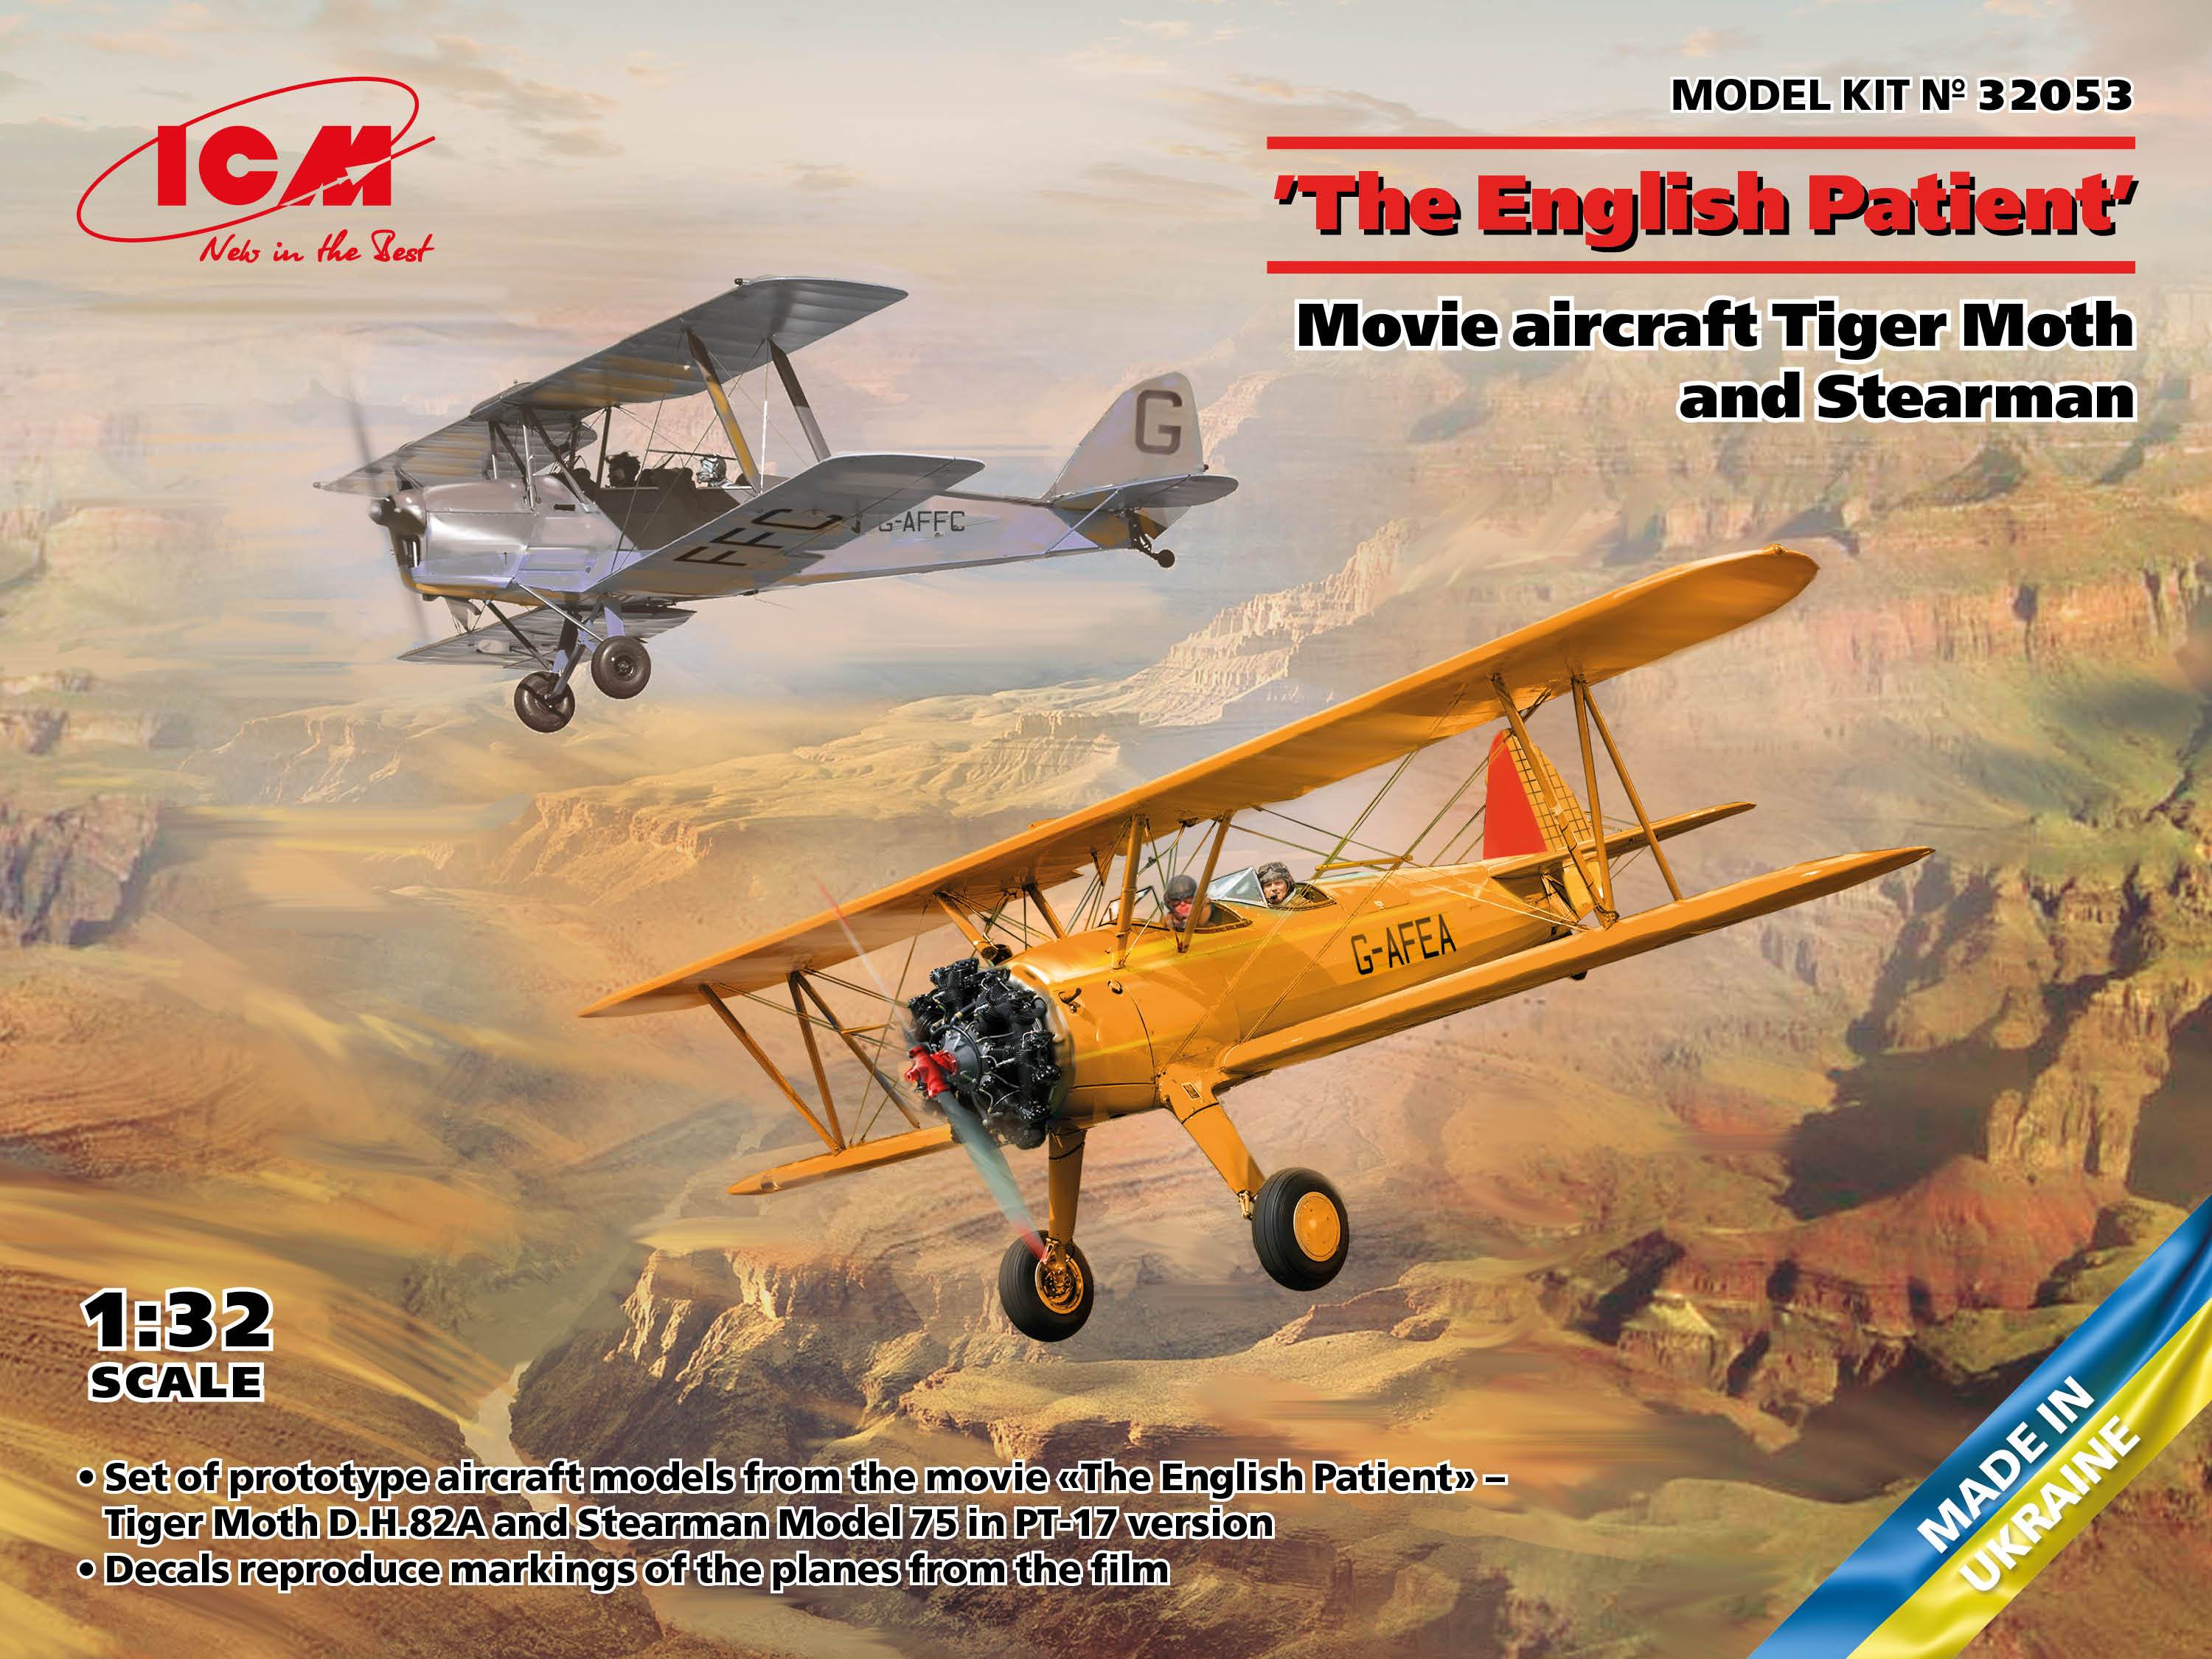 ICM 1:32 The English Patient Movie Aircraft Tiger Moth and Stearman